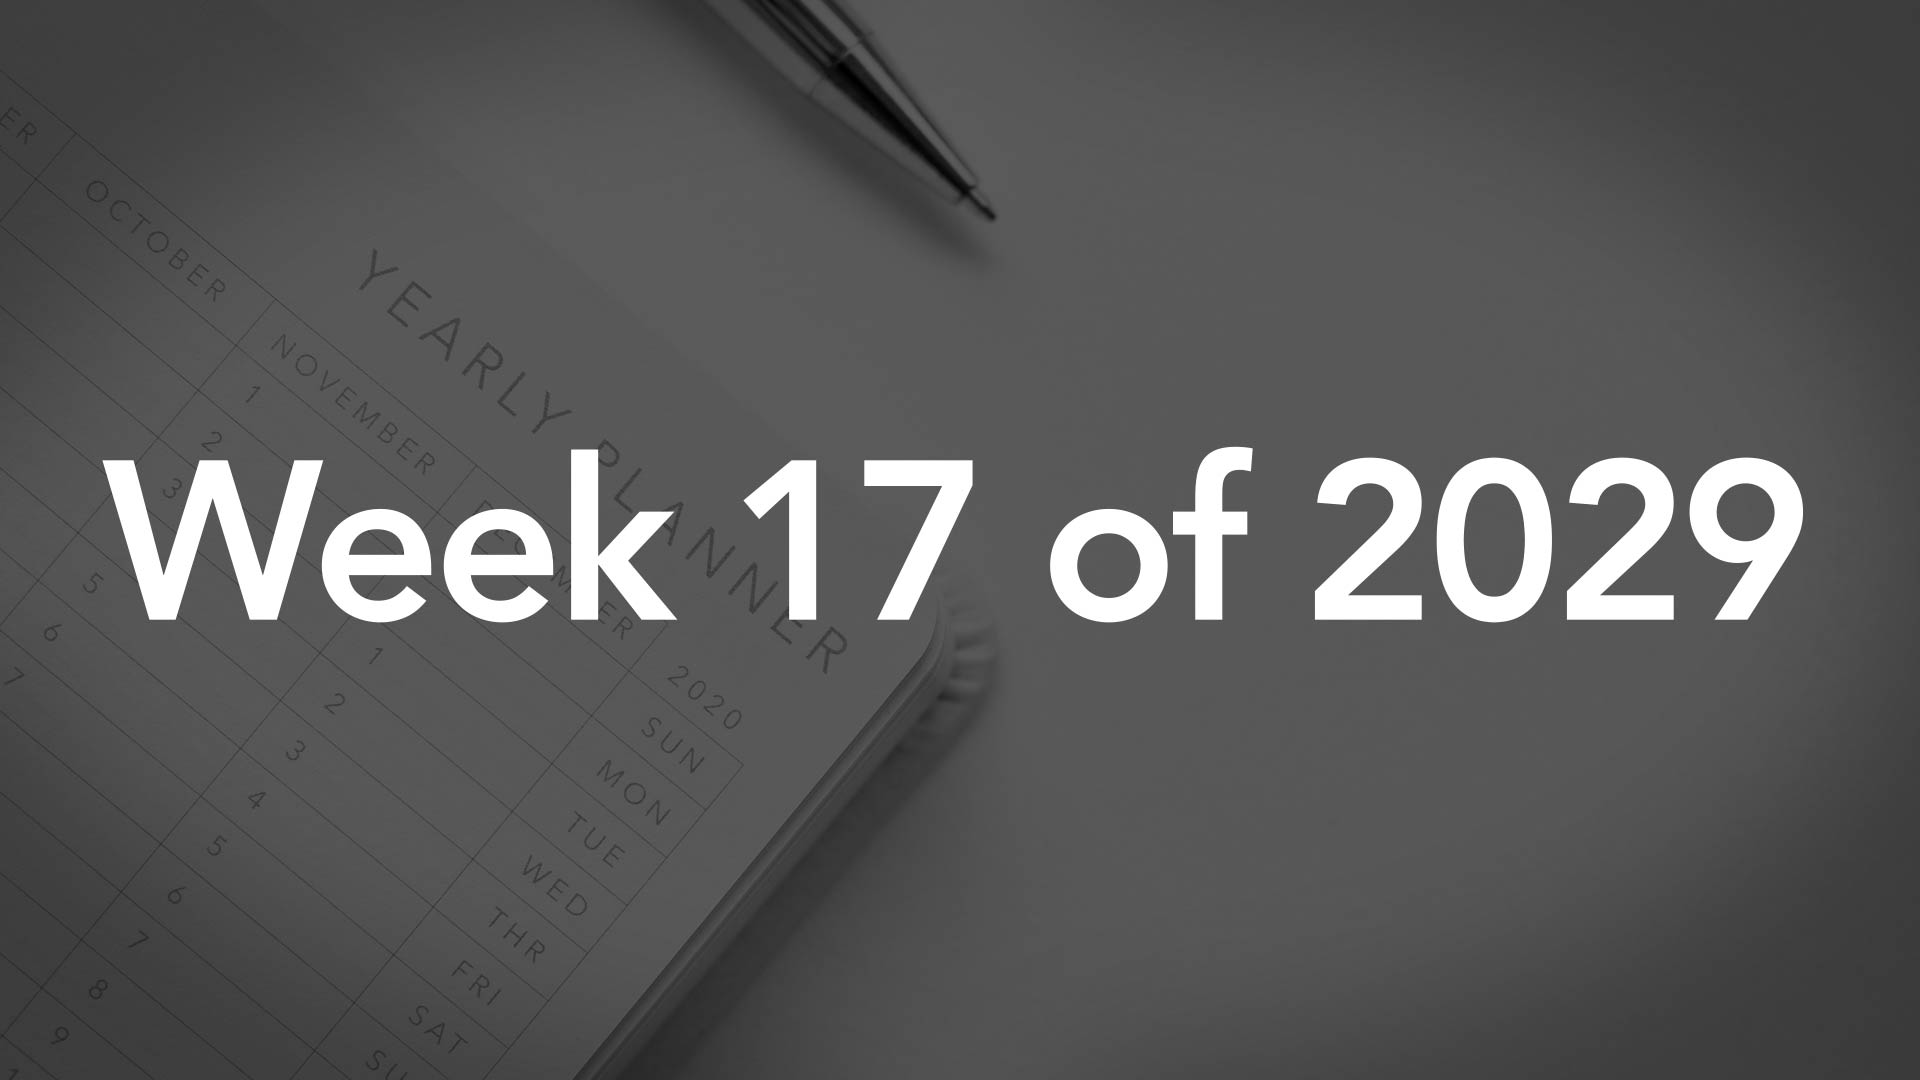 Title Image for Week 17 of 2029